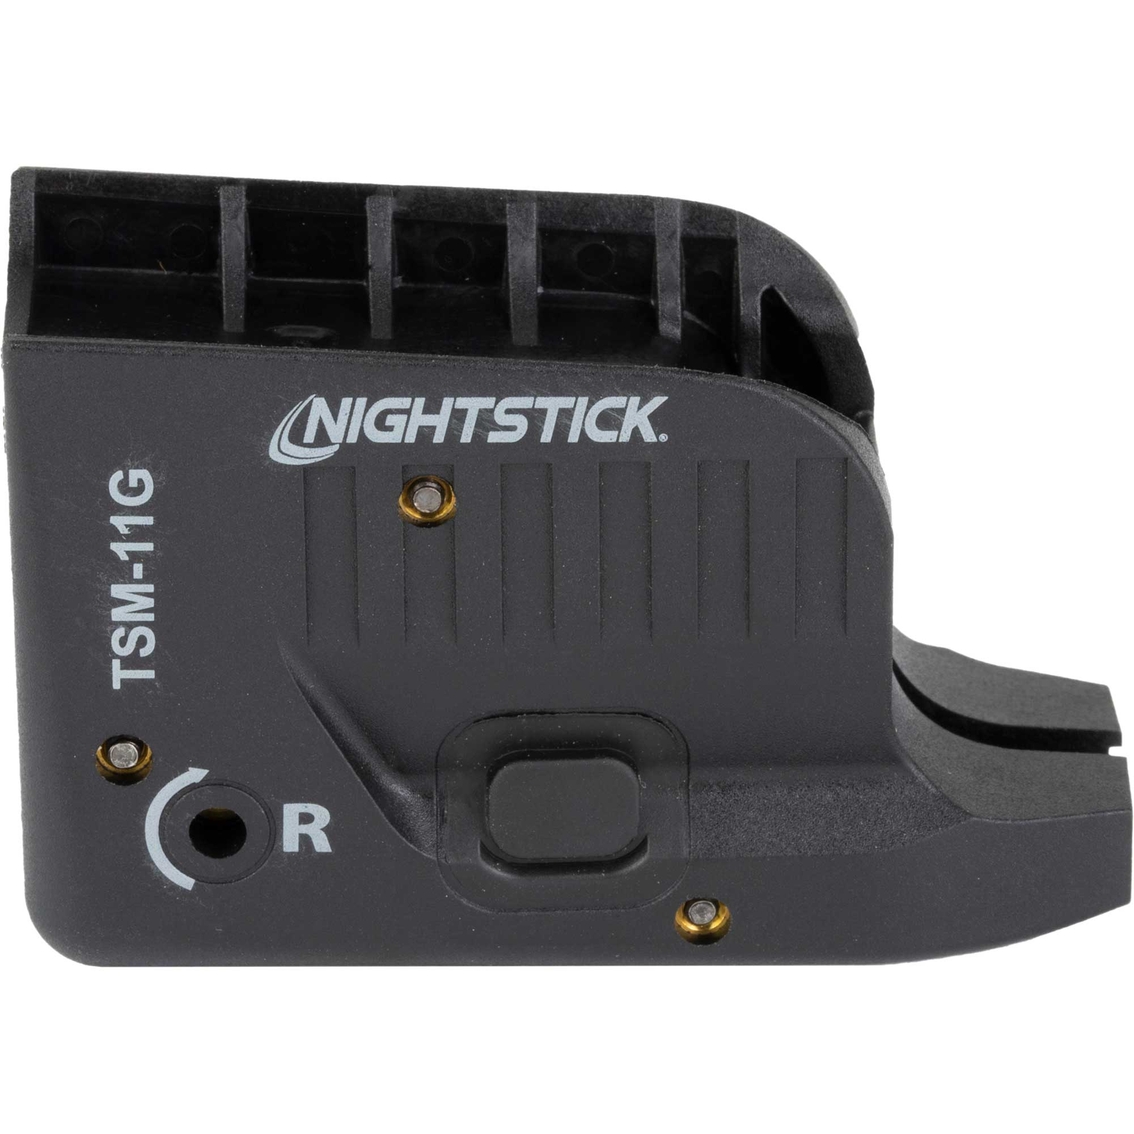 Nightstick Tsm-11g Compact Weaponlight With Green Laser For Glock 43 ...